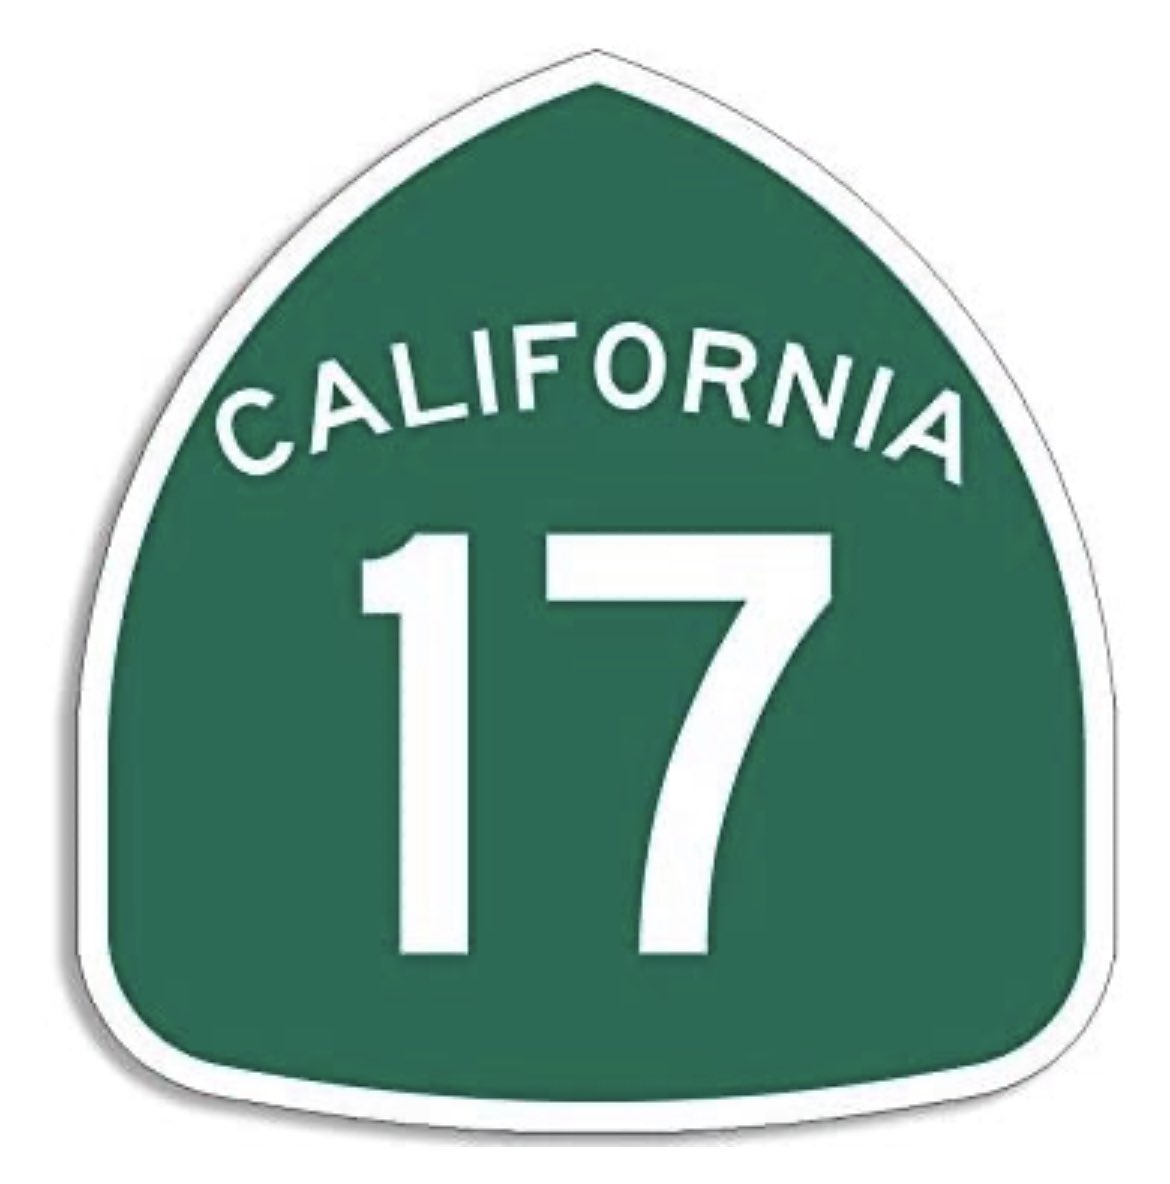 ⚠️Heads up! @CaltransD4 will be SHUTTING the far-right lane on SB HWY 17 from Idywild Rd. to Summit Rd., May 14-17, 9AM-2:30PM for vegetation removal. Plan your route ahead & expect delays: #trafficalert #CHP